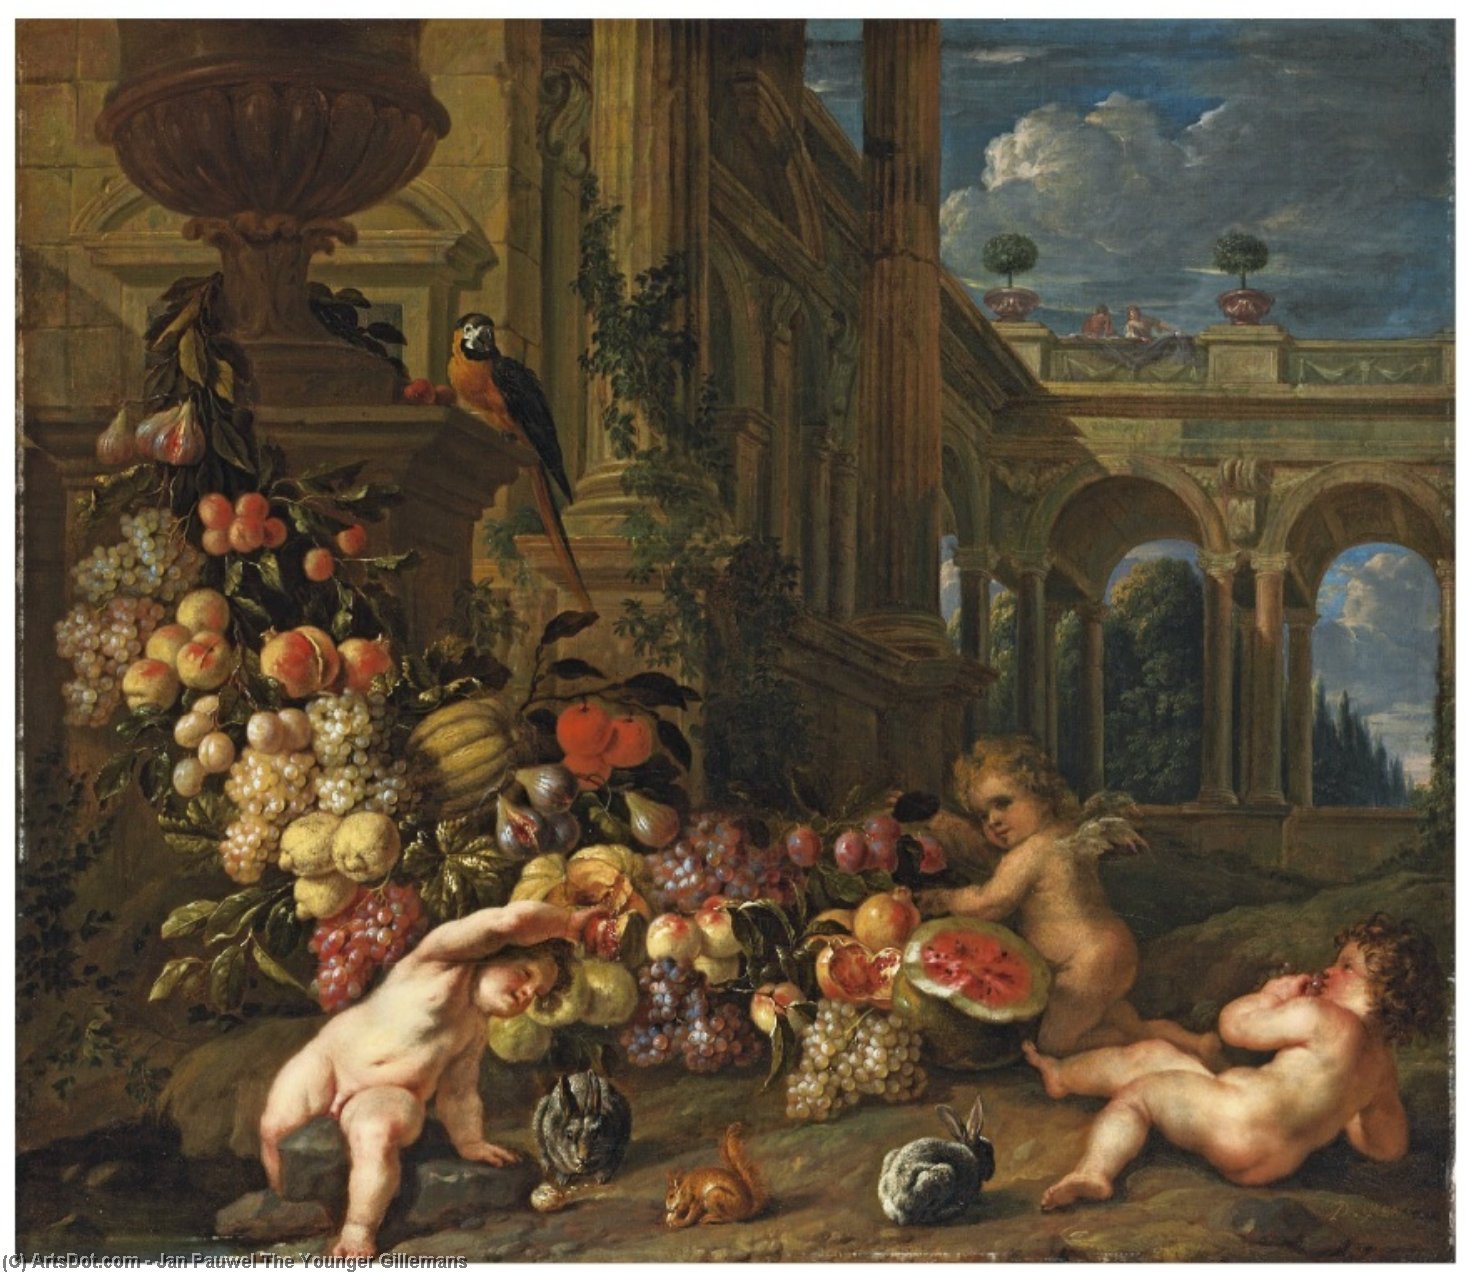 Buy Museum Art Reproductions An architectural capriccio with putti around a swag of fruit, with a parrot, squirrel and rabbits by Jan Pauwel The Younger Gillemans (1651-1704, Belgium) | ArtsDot.com